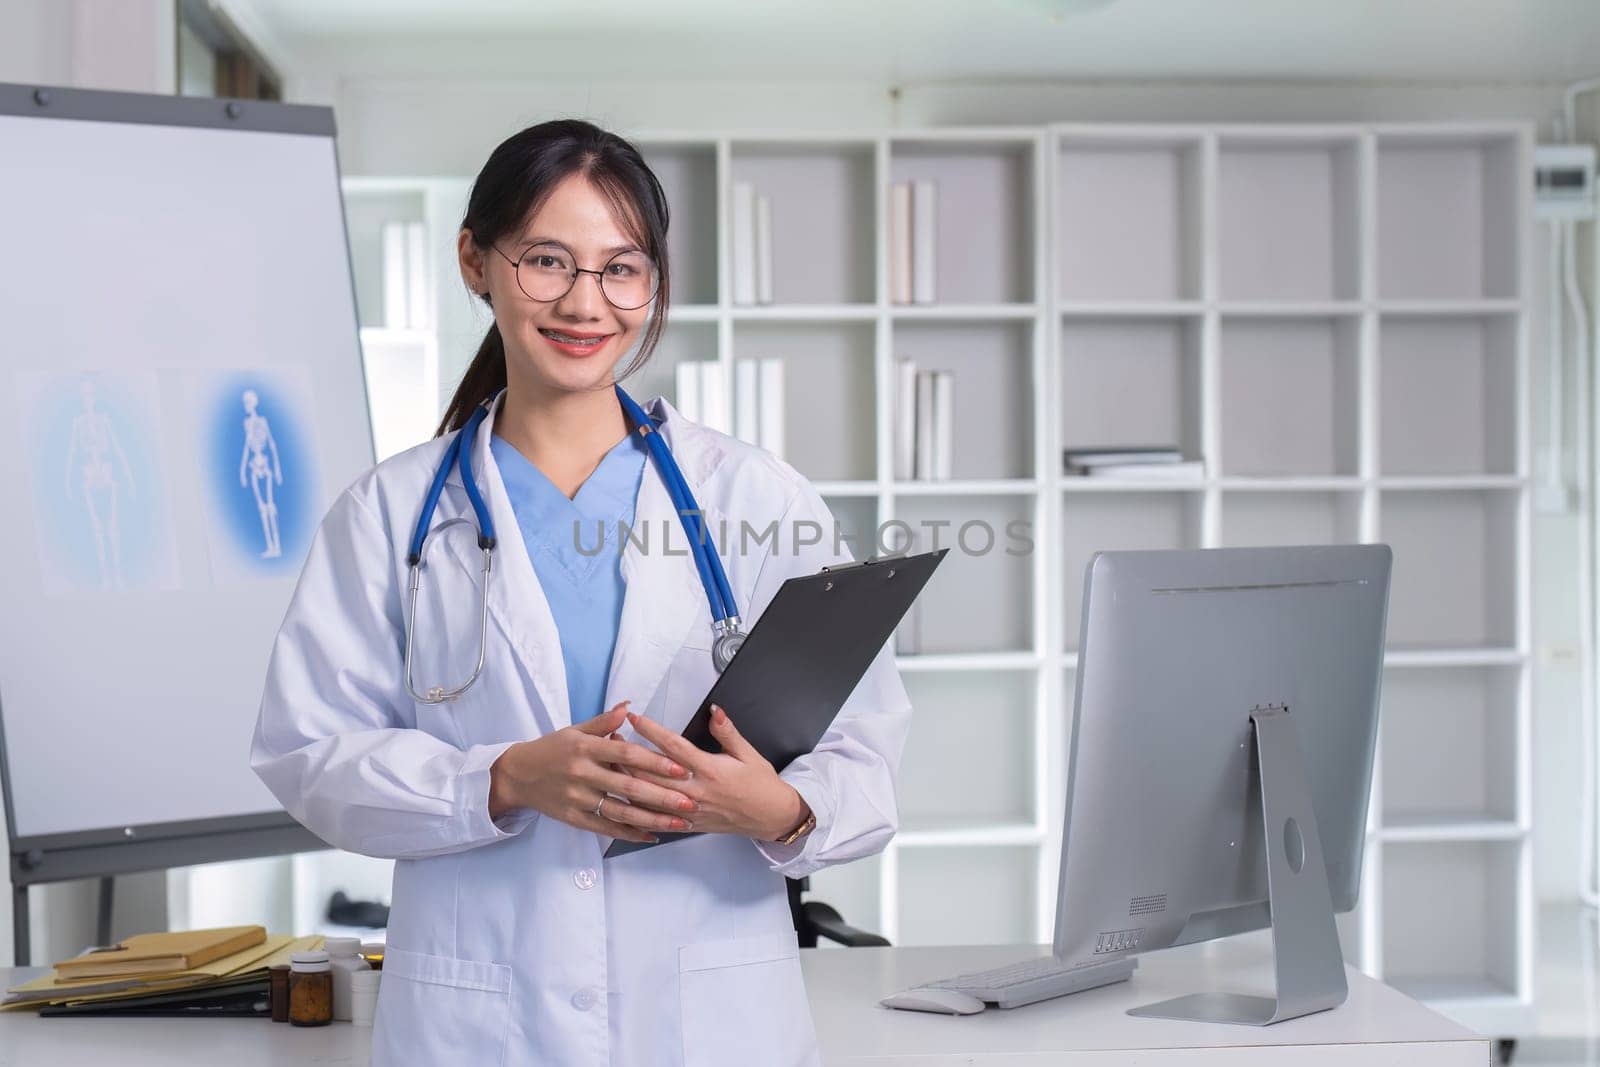 Portrait of a smiling female doctor holding a clipboard Wear a medical coat and stethoscope in a hospital office. Medical and healthcare concept by wichayada